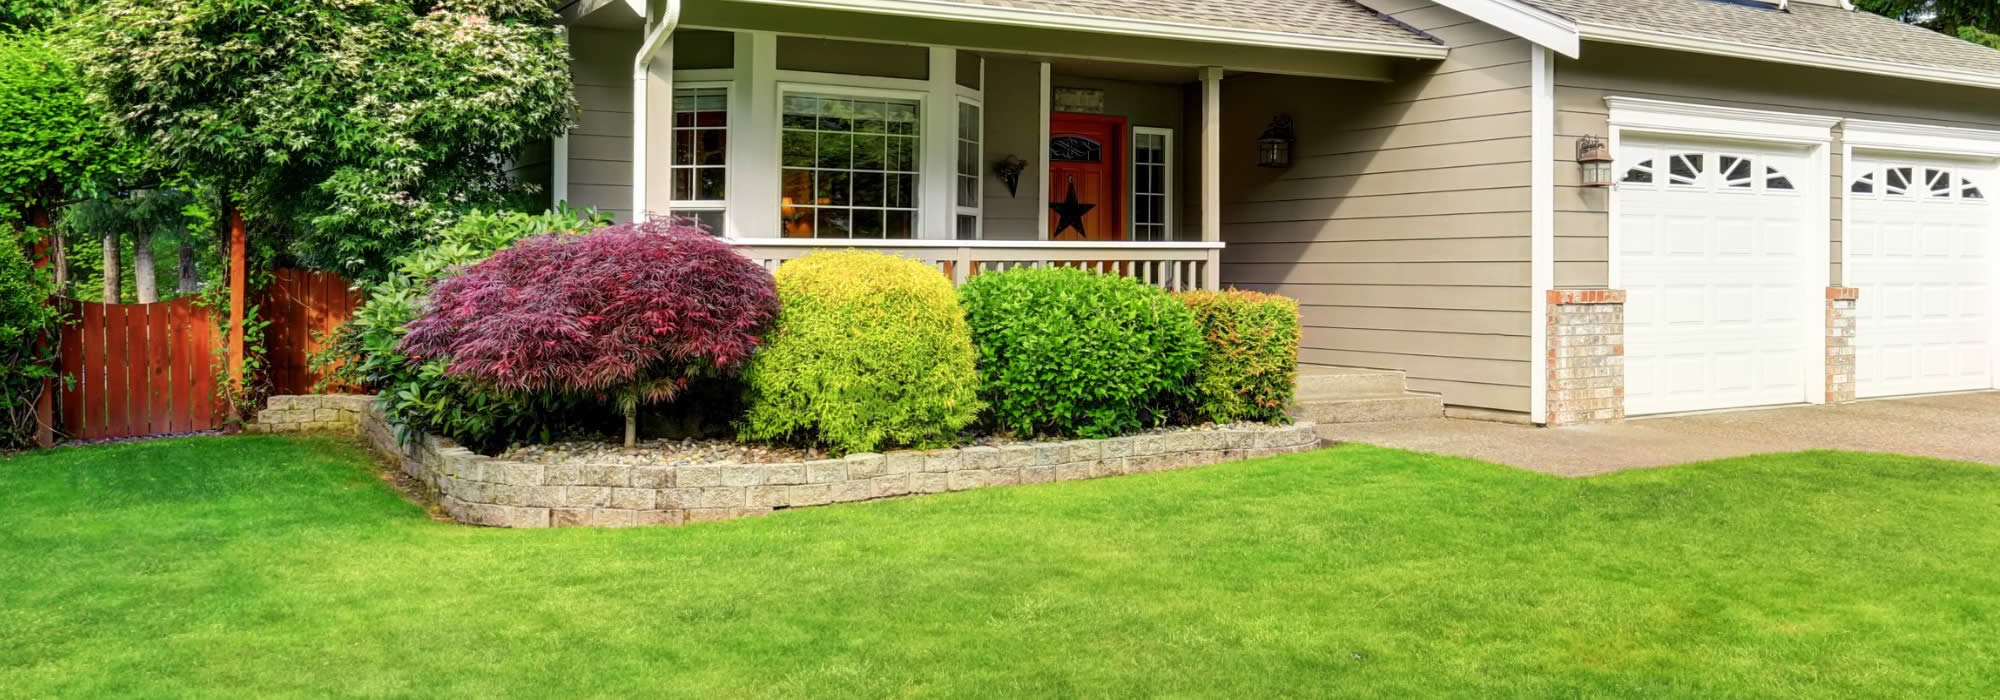 Landscaping Services in Town of Westport